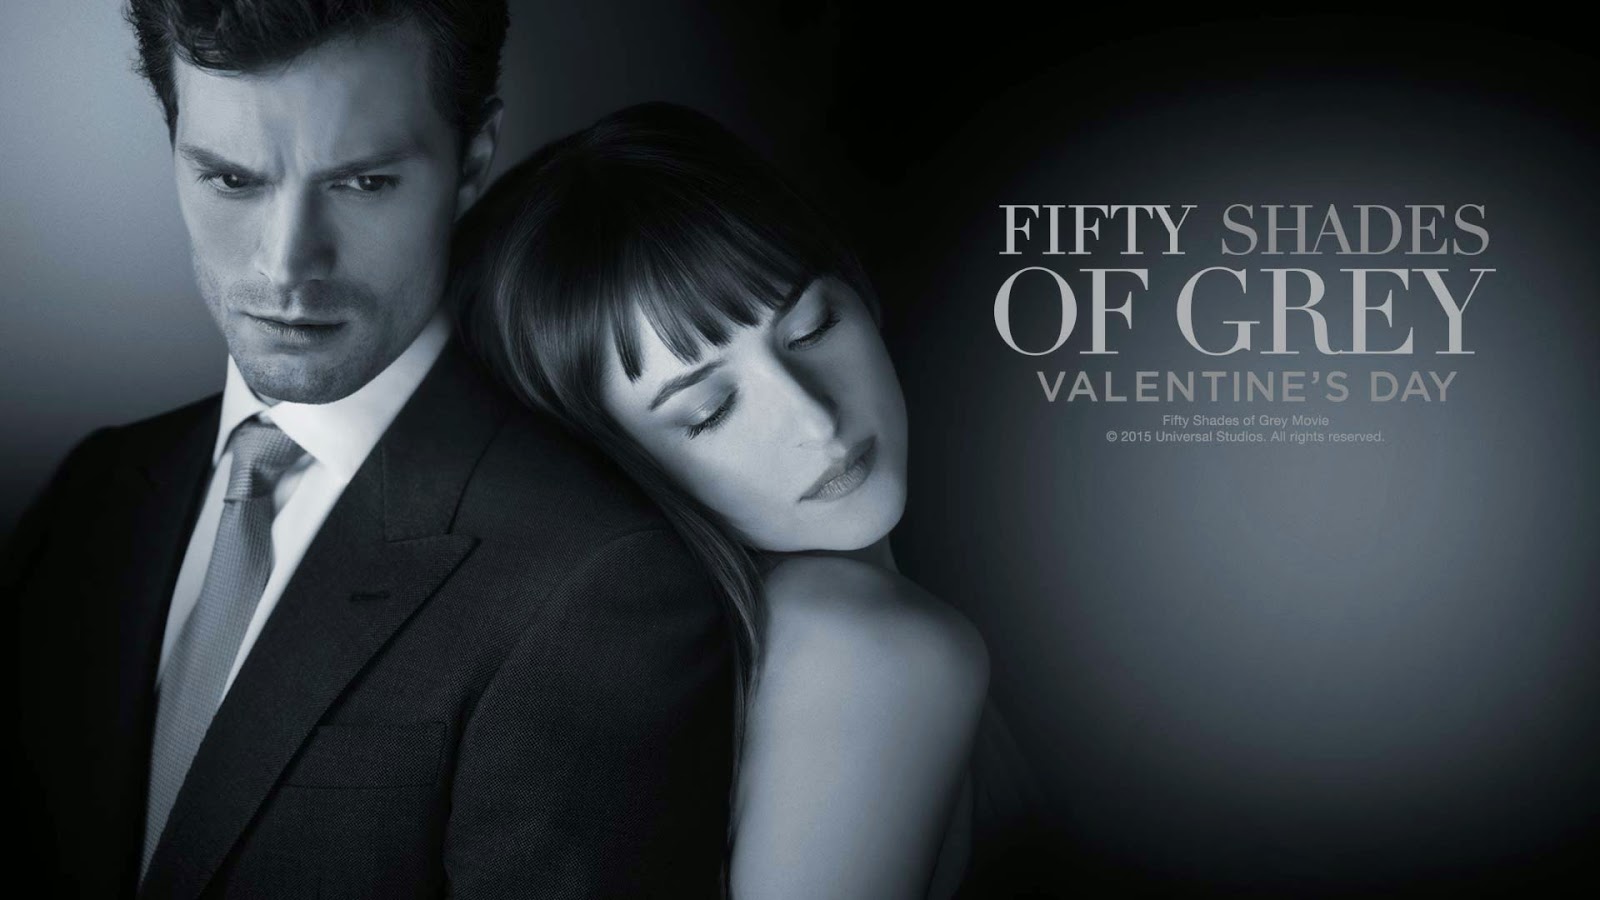 MOVIES: Fifty Shades Of Grey - 2nd And 3rd Film Confirmed At Fan-Screening